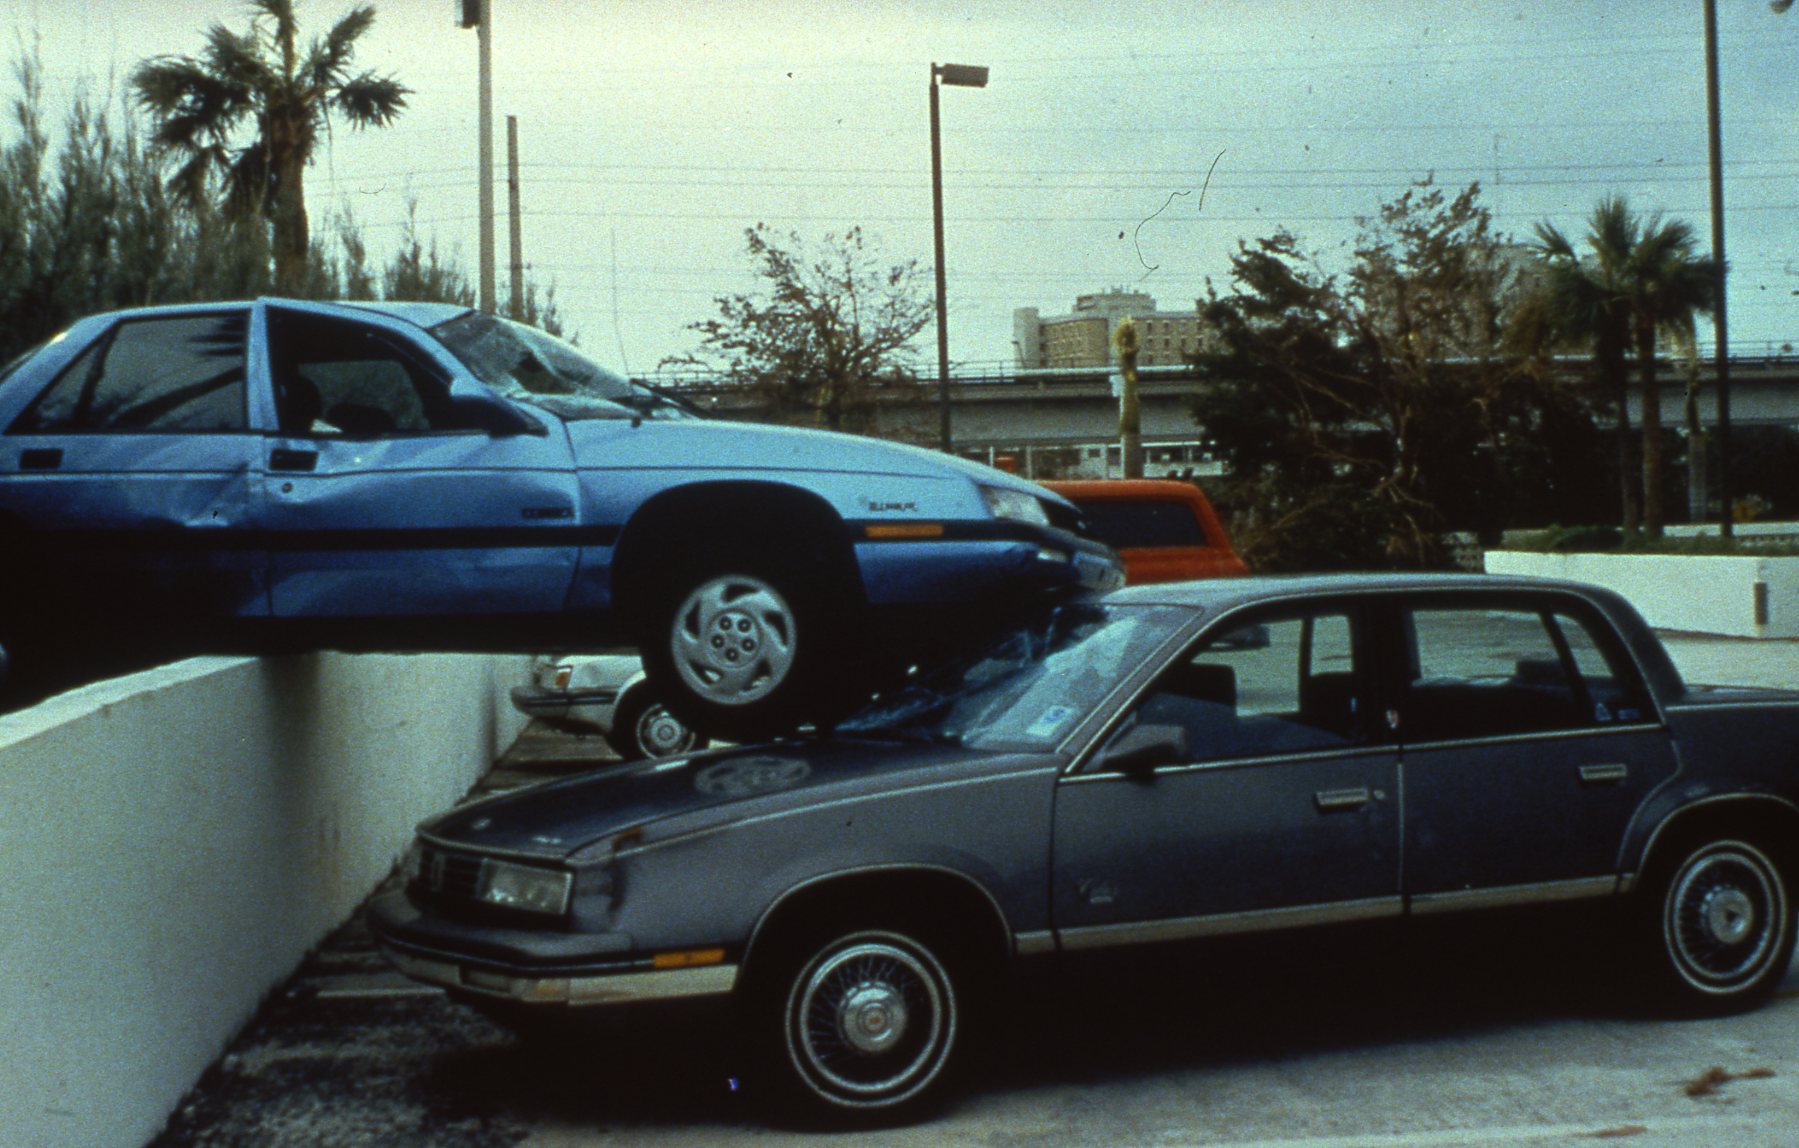 Picture of the vehicle outside in the parking lot of the old NHC building in Coral Gables. Picture courtesy of NOAA.